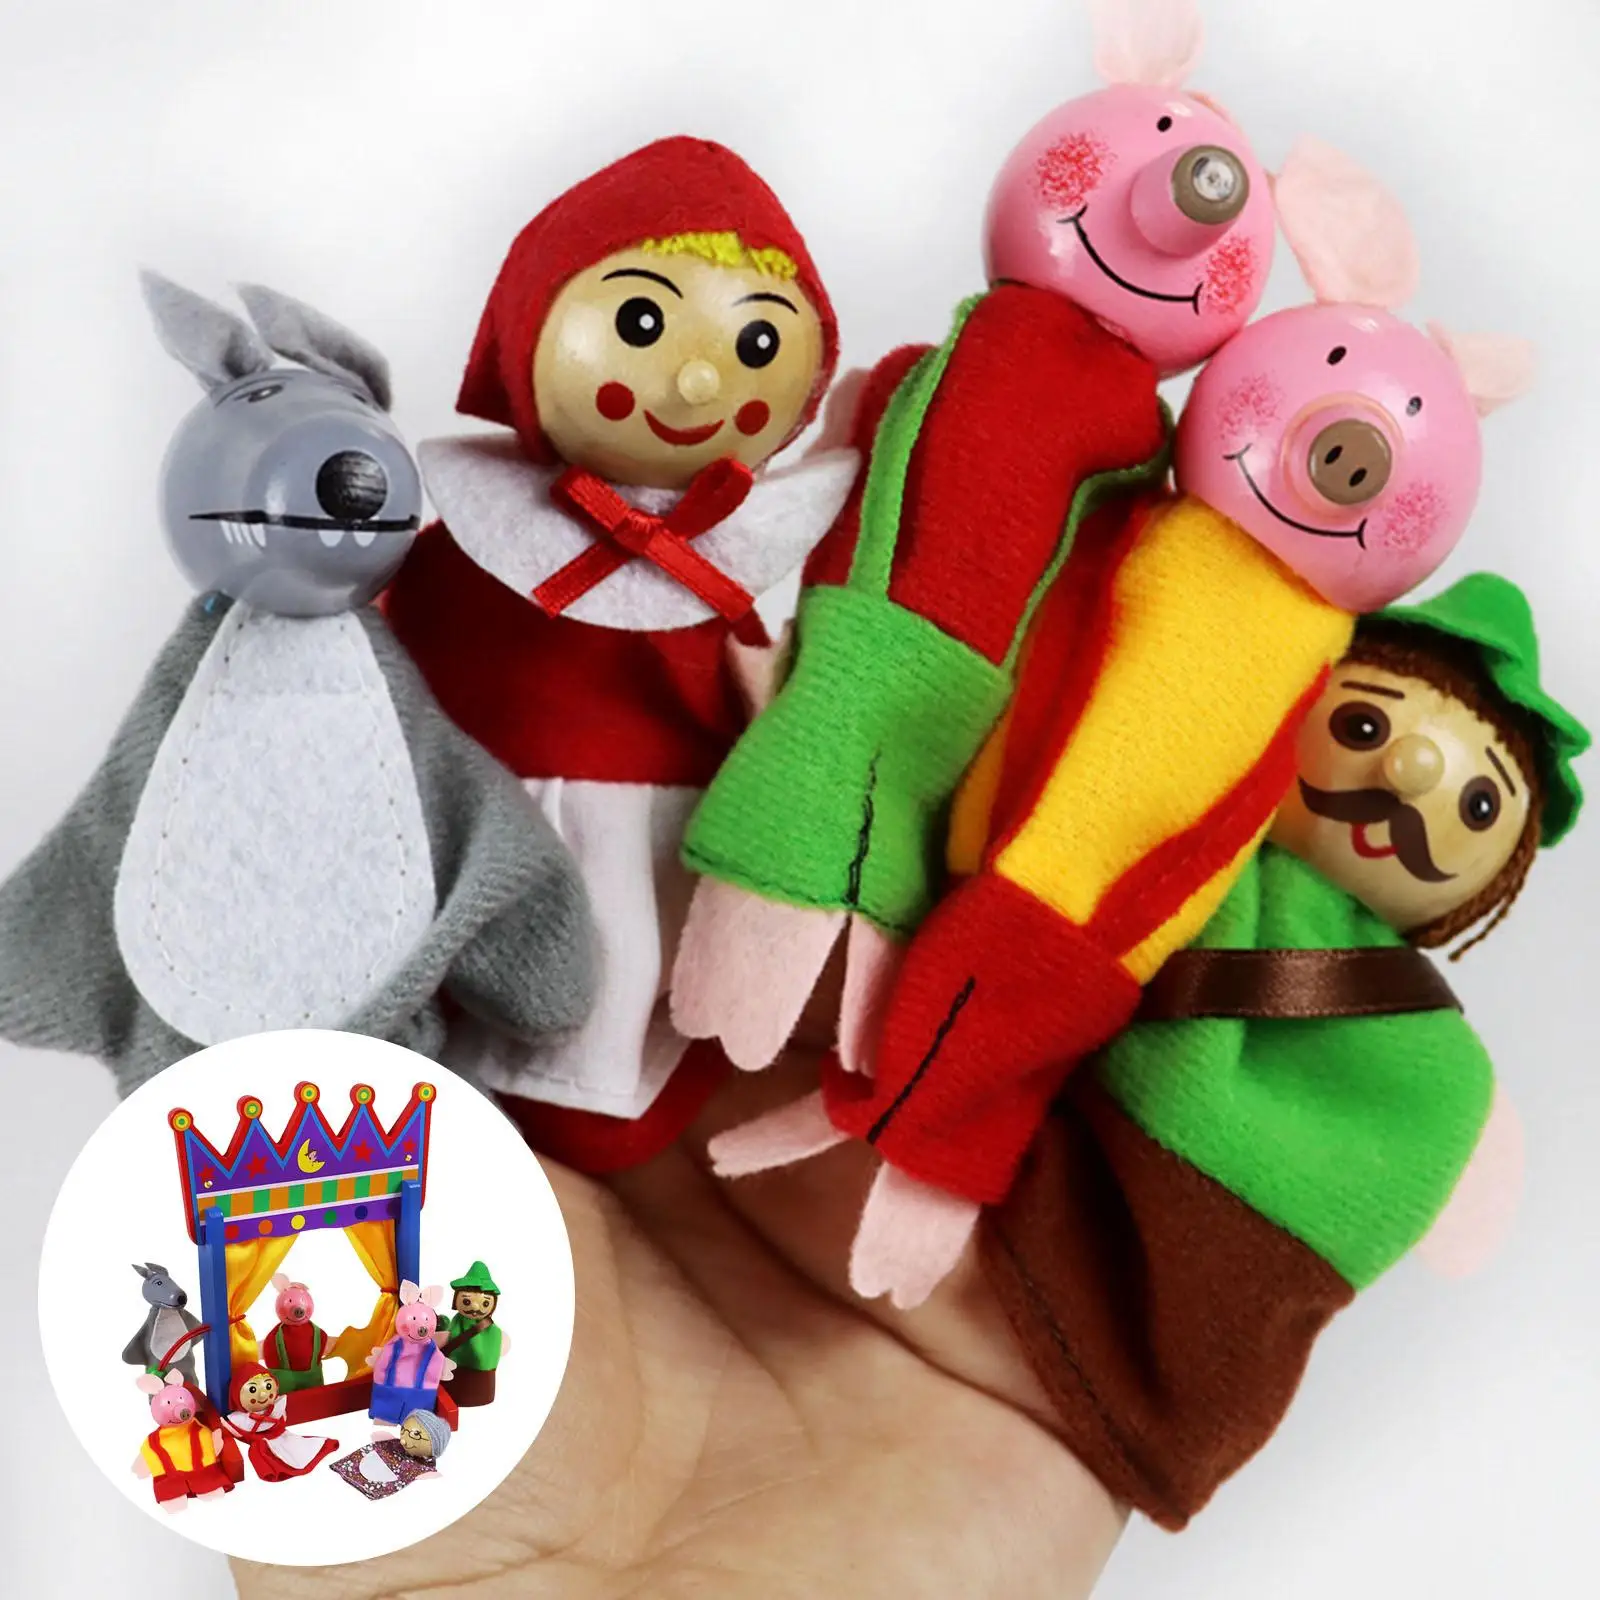 Multipurpose Mini Puppet Stand Set Wooden Entertainment Toys Party Favor Plush Doll Finger Puppets for Role Play Games Parties